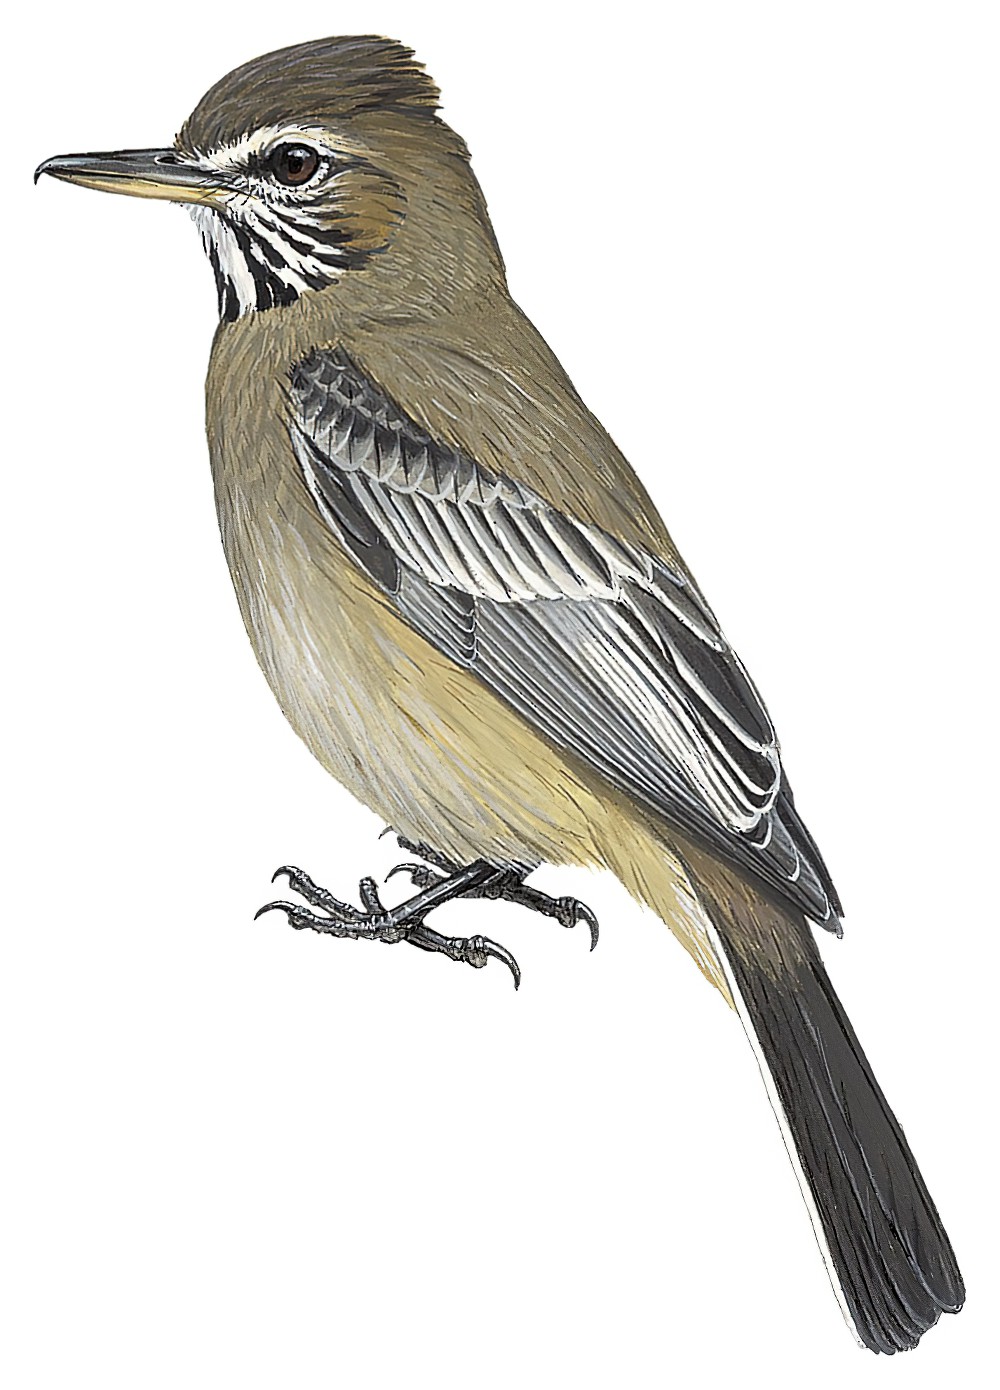 Gray-bellied Shrike-Tyrant / Agriornis micropterus